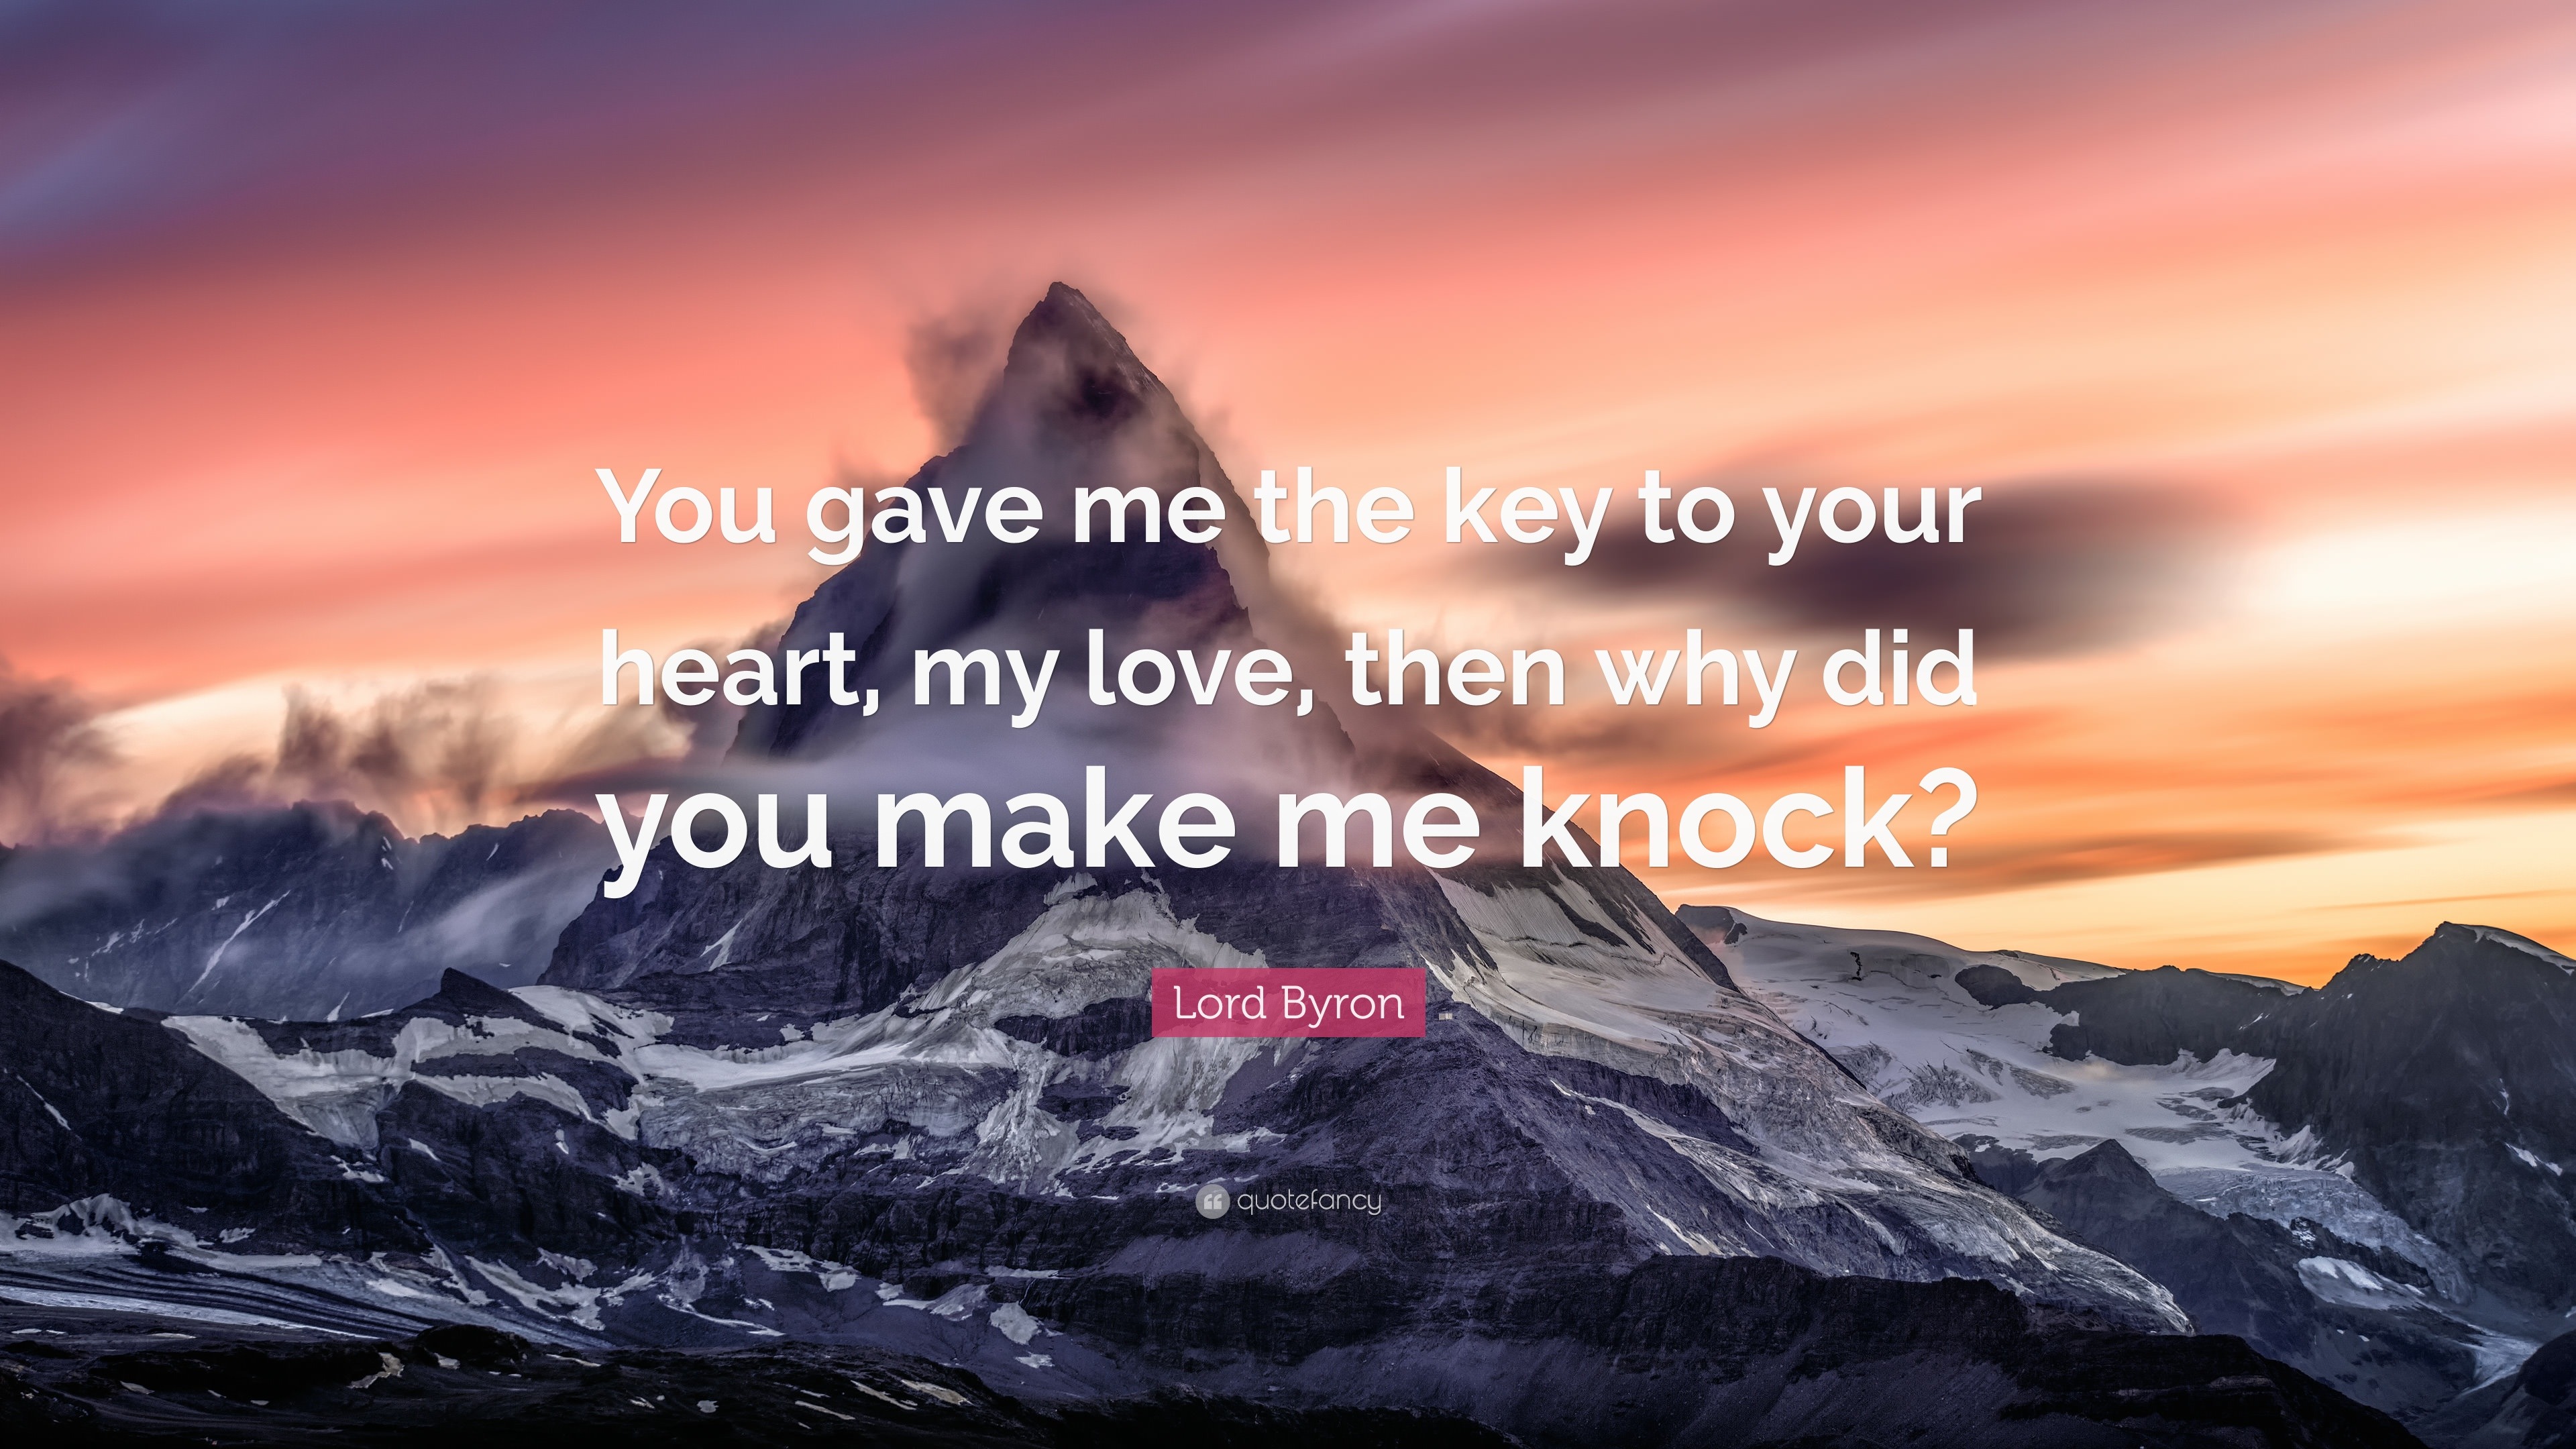 Lord Byron Quote “You gave me the key to your heart my love